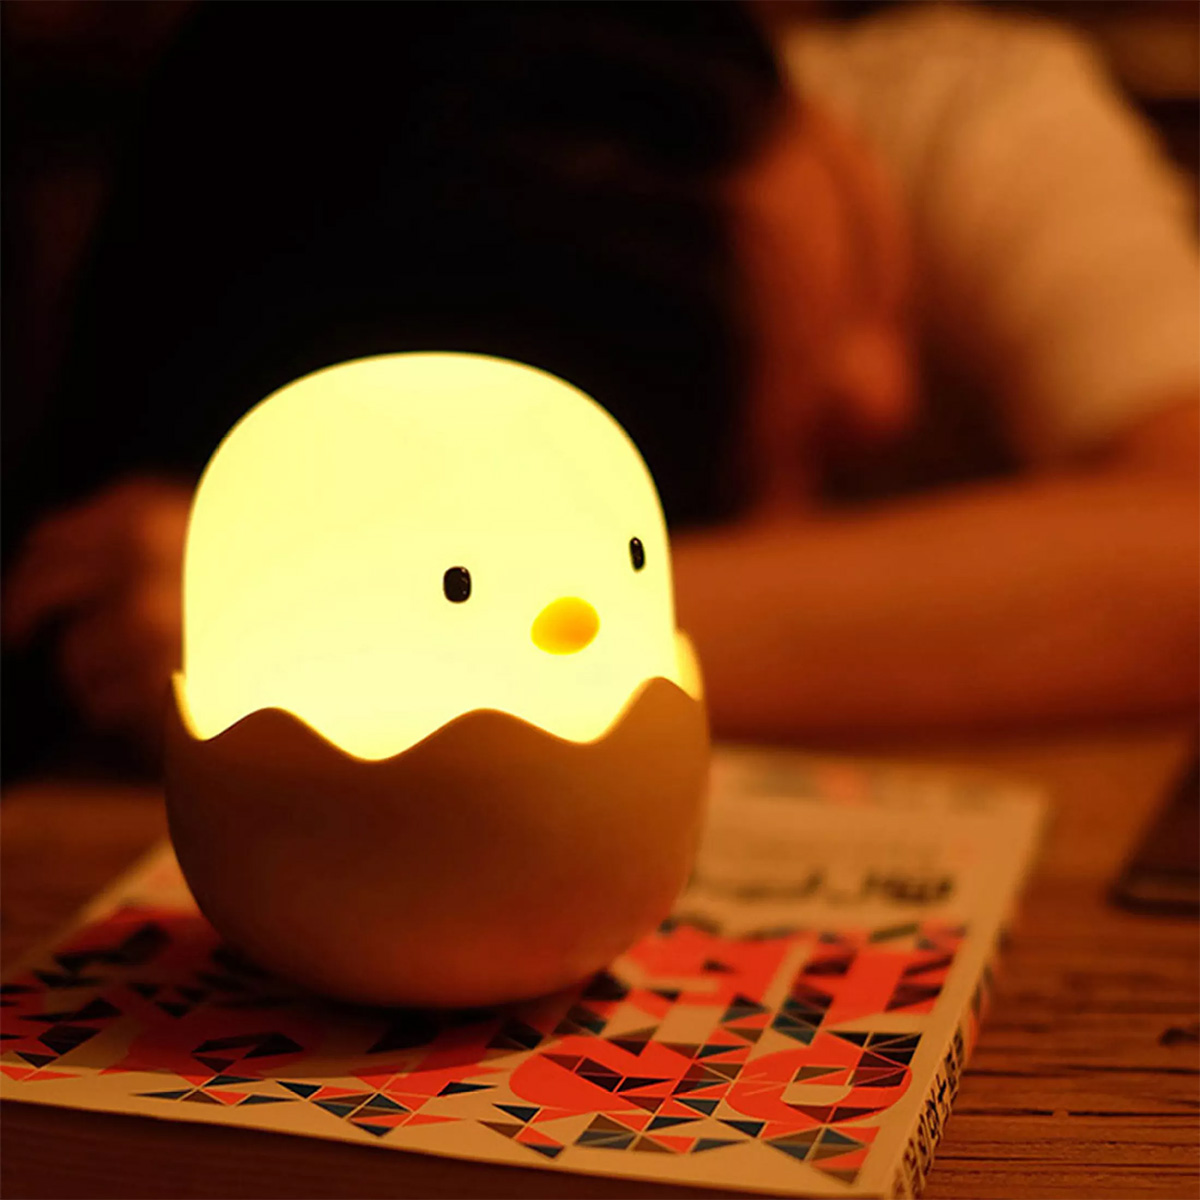 http://www.home-designing.com/product-of-the-week-cute-hatching-chick-night-light